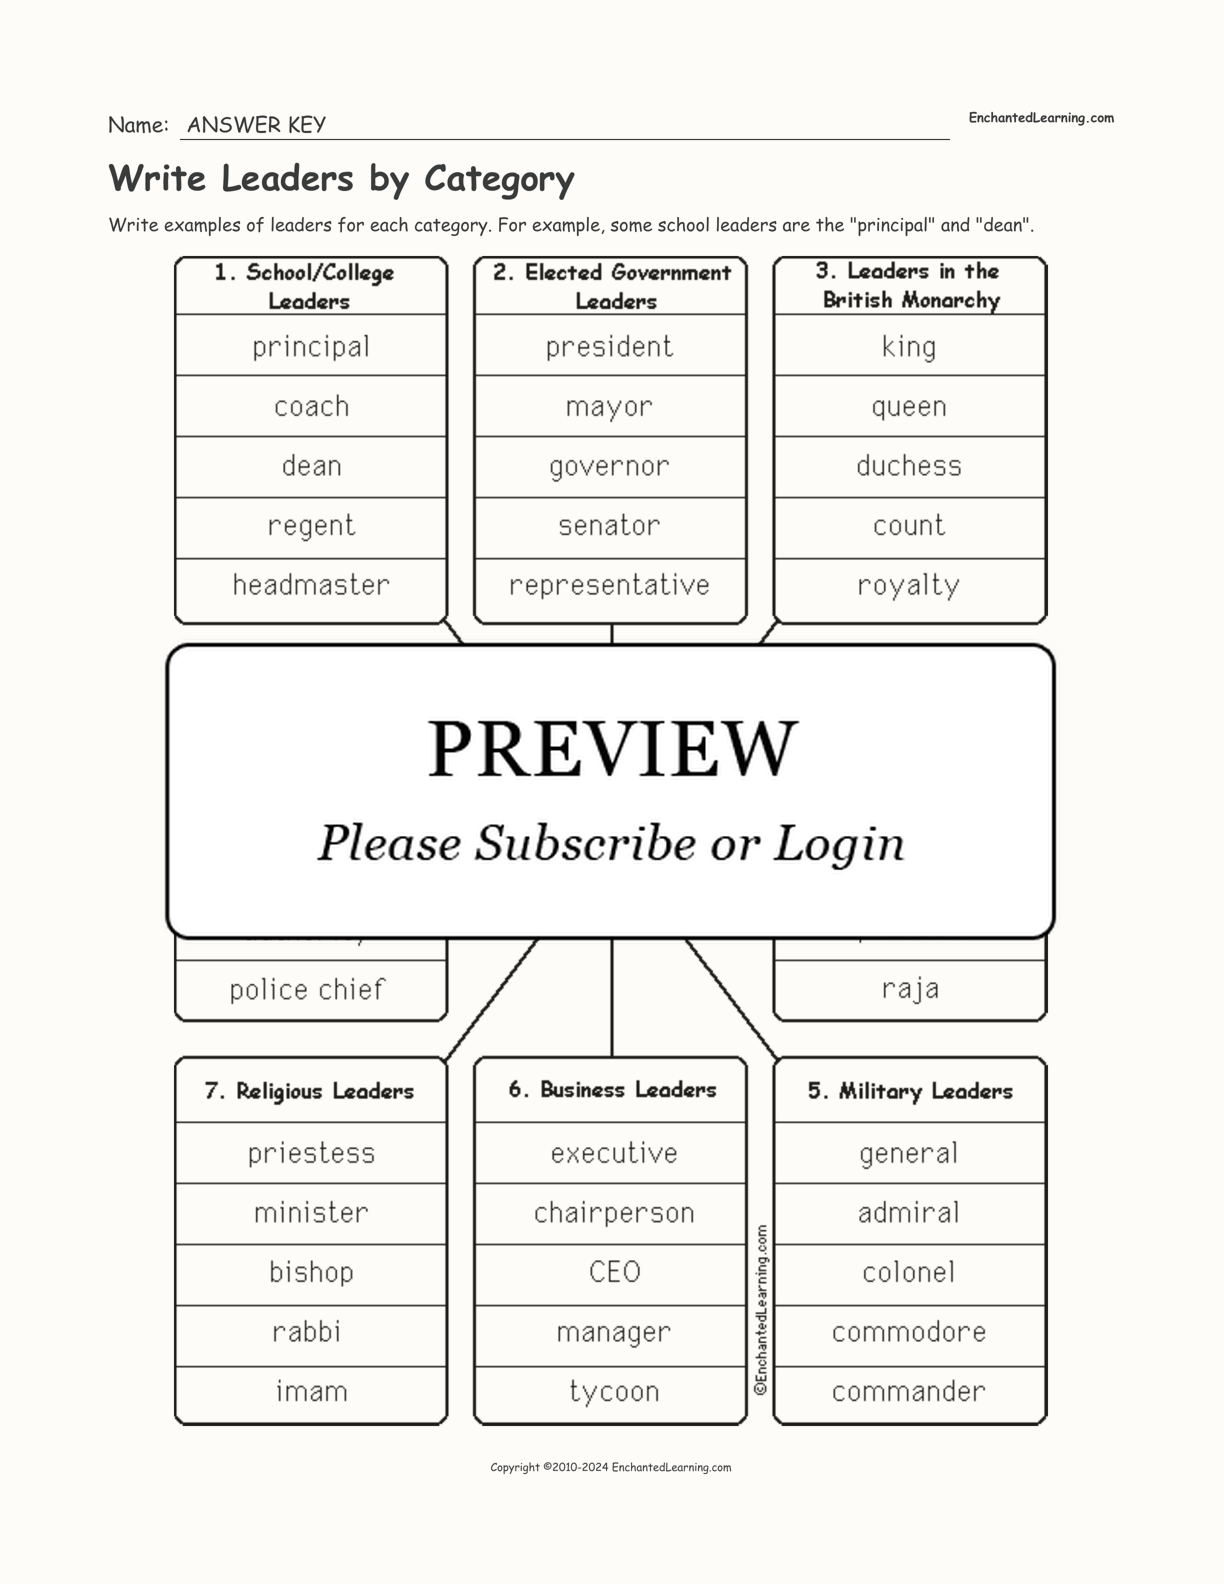 Write Leaders by Category interactive worksheet page 2